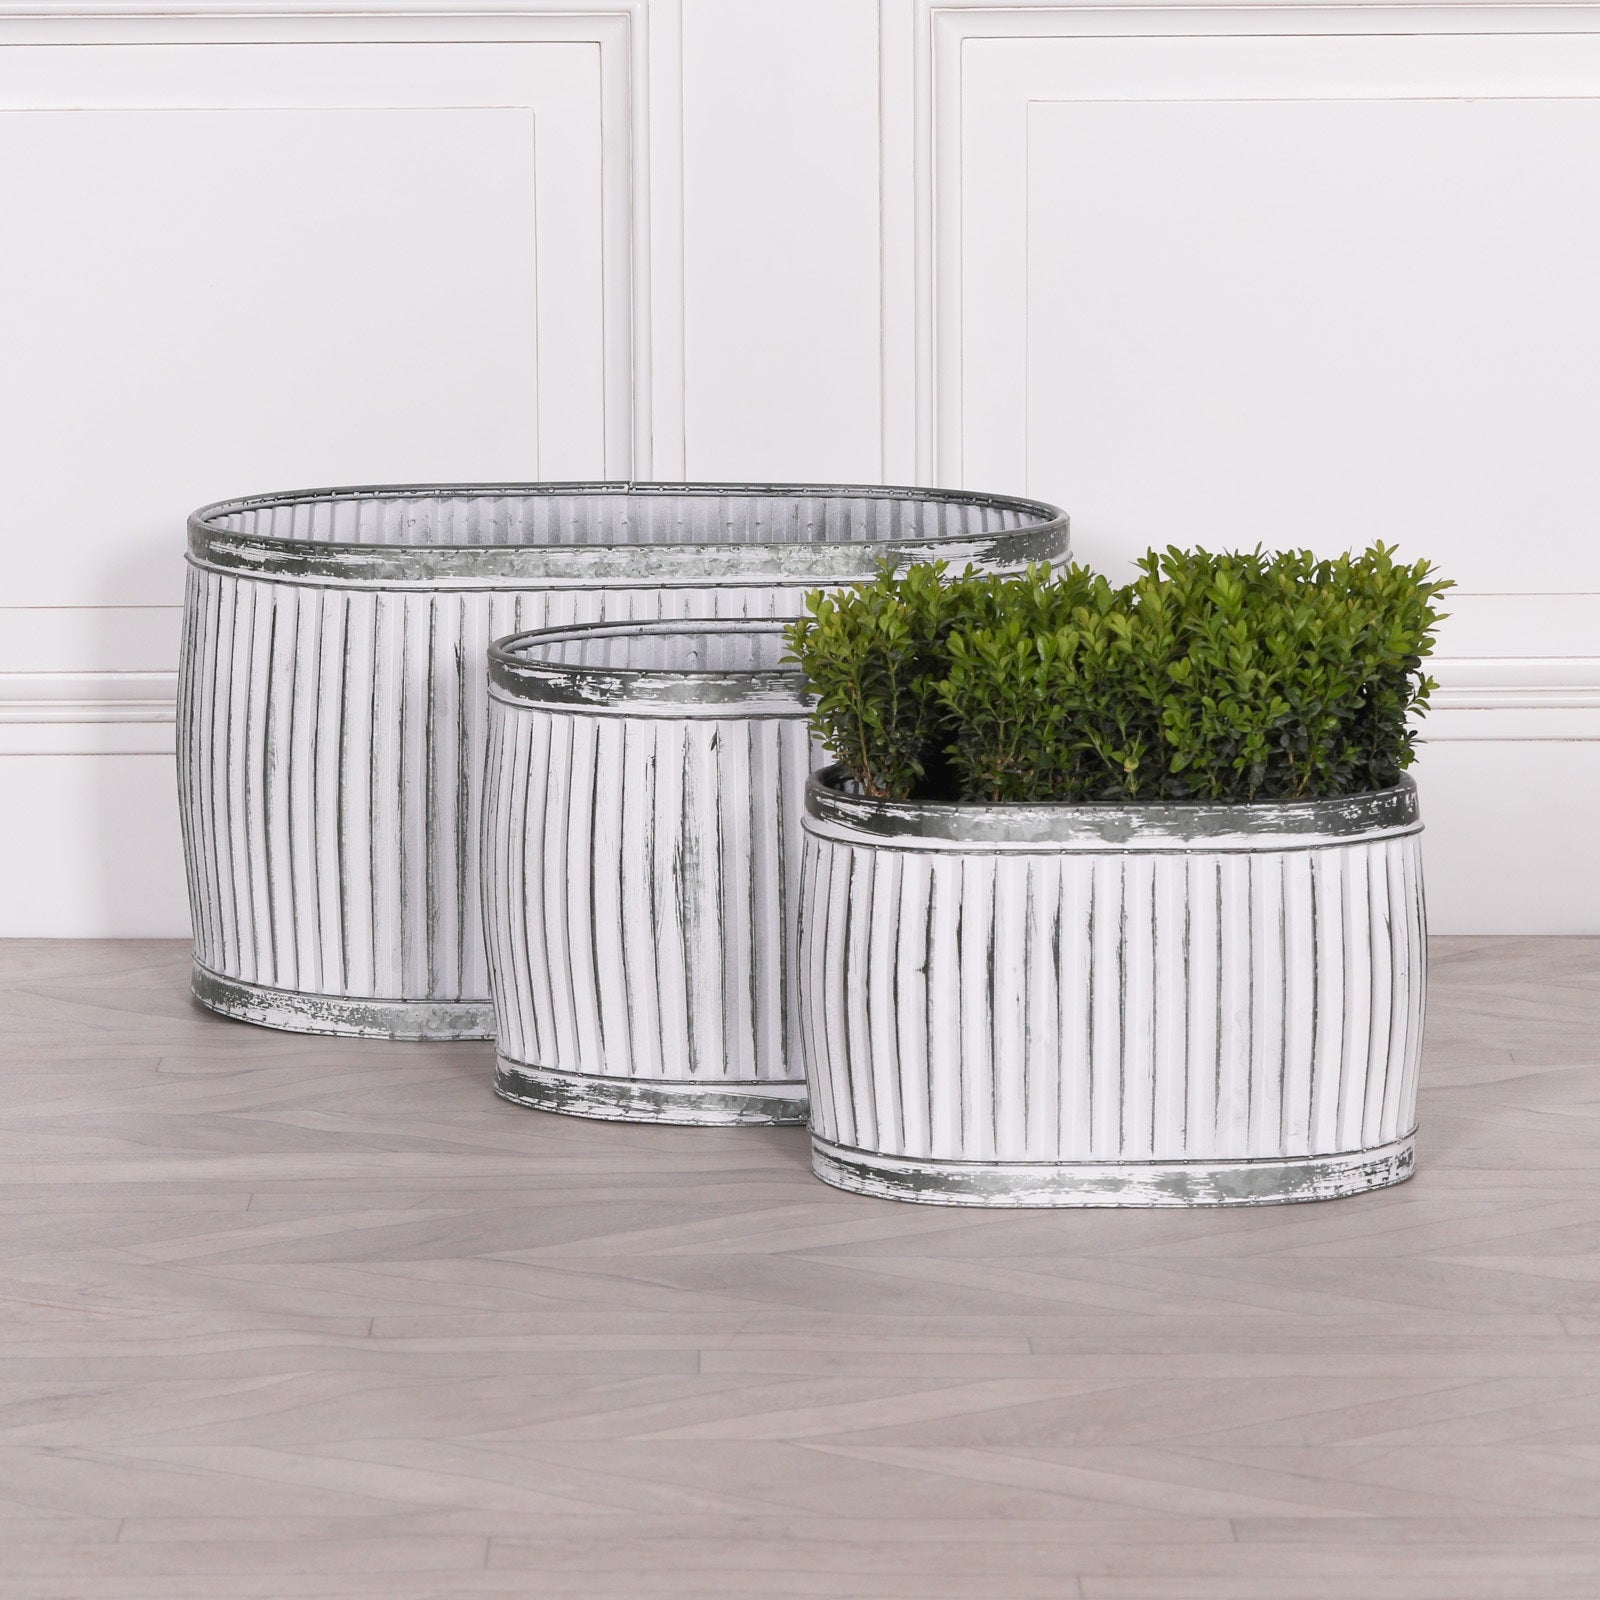 Dolly Tub Oval Metal Planter - Small